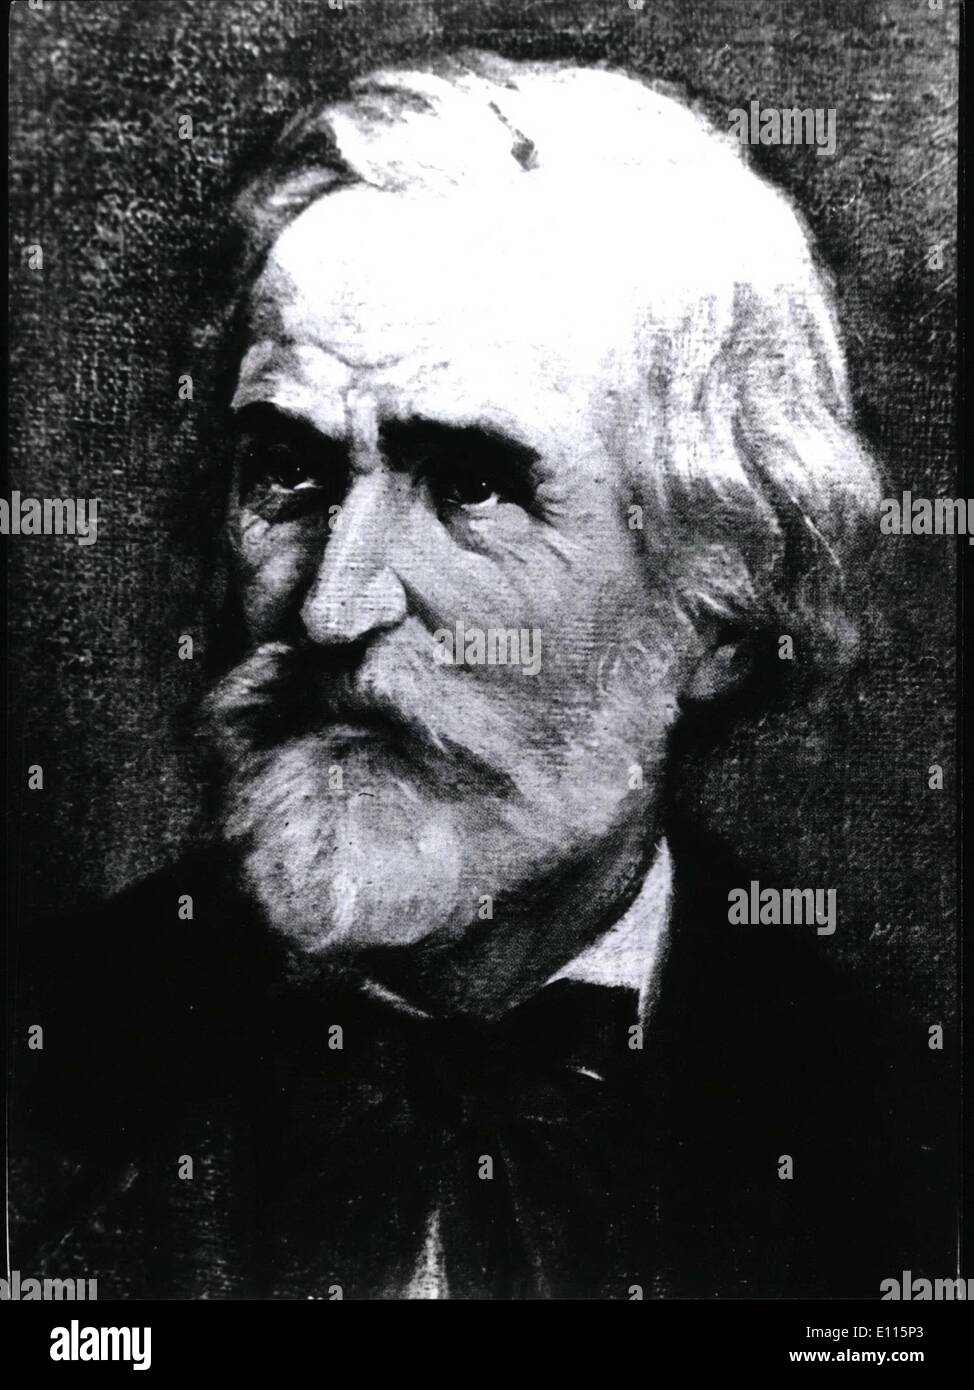 Jan. 01, 1976 - 75th Anniversary Of The Death Of Guiseppe Verdi: 75 years ago, on January 27th 1901, the famous Italian Composer Guiseppe Verdi (picture) died on the age of 87 in Milan. Guiseppe Verdi became the most important representative of the Italian opera in the second half of the 19th century. His education was mainly promoted by A. Barazzi and was completed with V. Lavigna in Milan. After having been a conductor in Bussete, he composed his first opera in 1839 - three years later he had his first big success with ''Nabucco'' Stock Photo